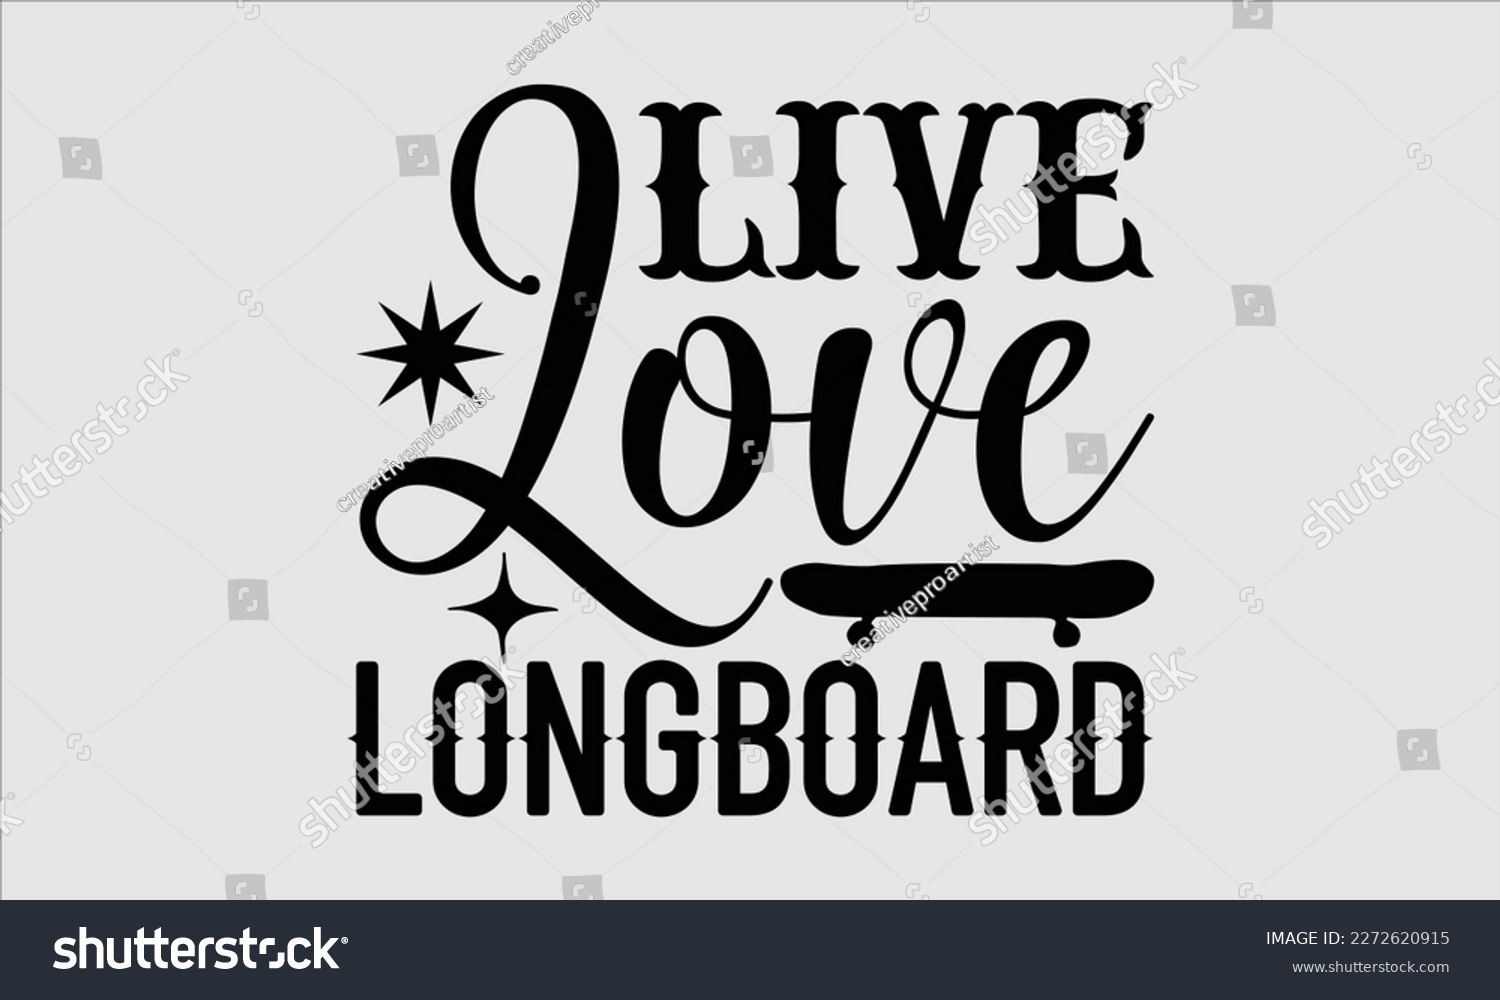 SVG of Live love longboard- Longboarding T- shirt Design, Hand drawn lettering phrase, Illustration for prints on t-shirts and bags, posters, funny eps files, svg cricut svg